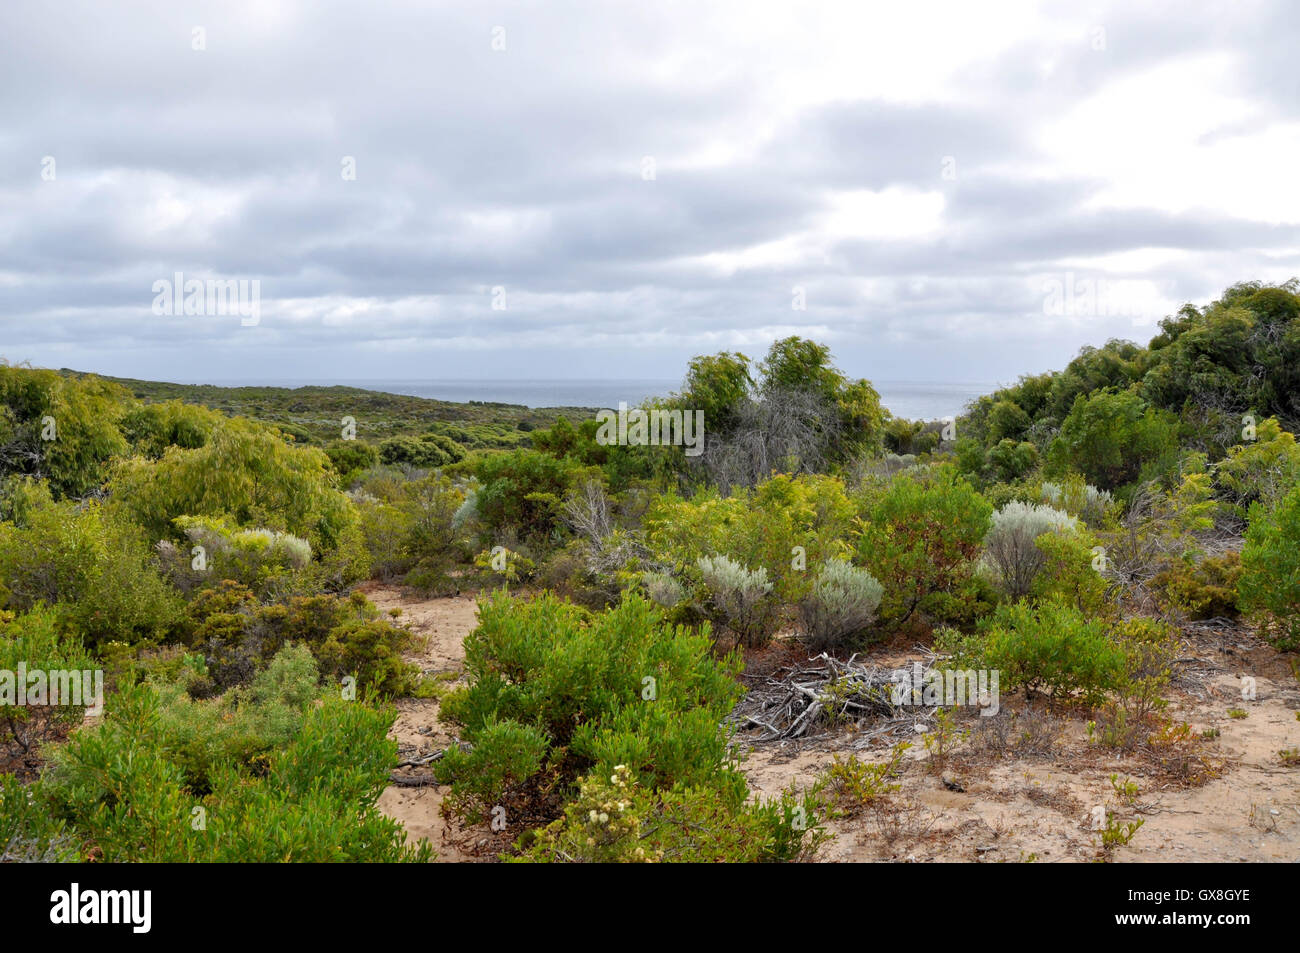 Lush green bushland in the dunes at Cape Naturaliste with a hint of the Indian Ocean on a cloudy day in Western Australia. Stock Photo